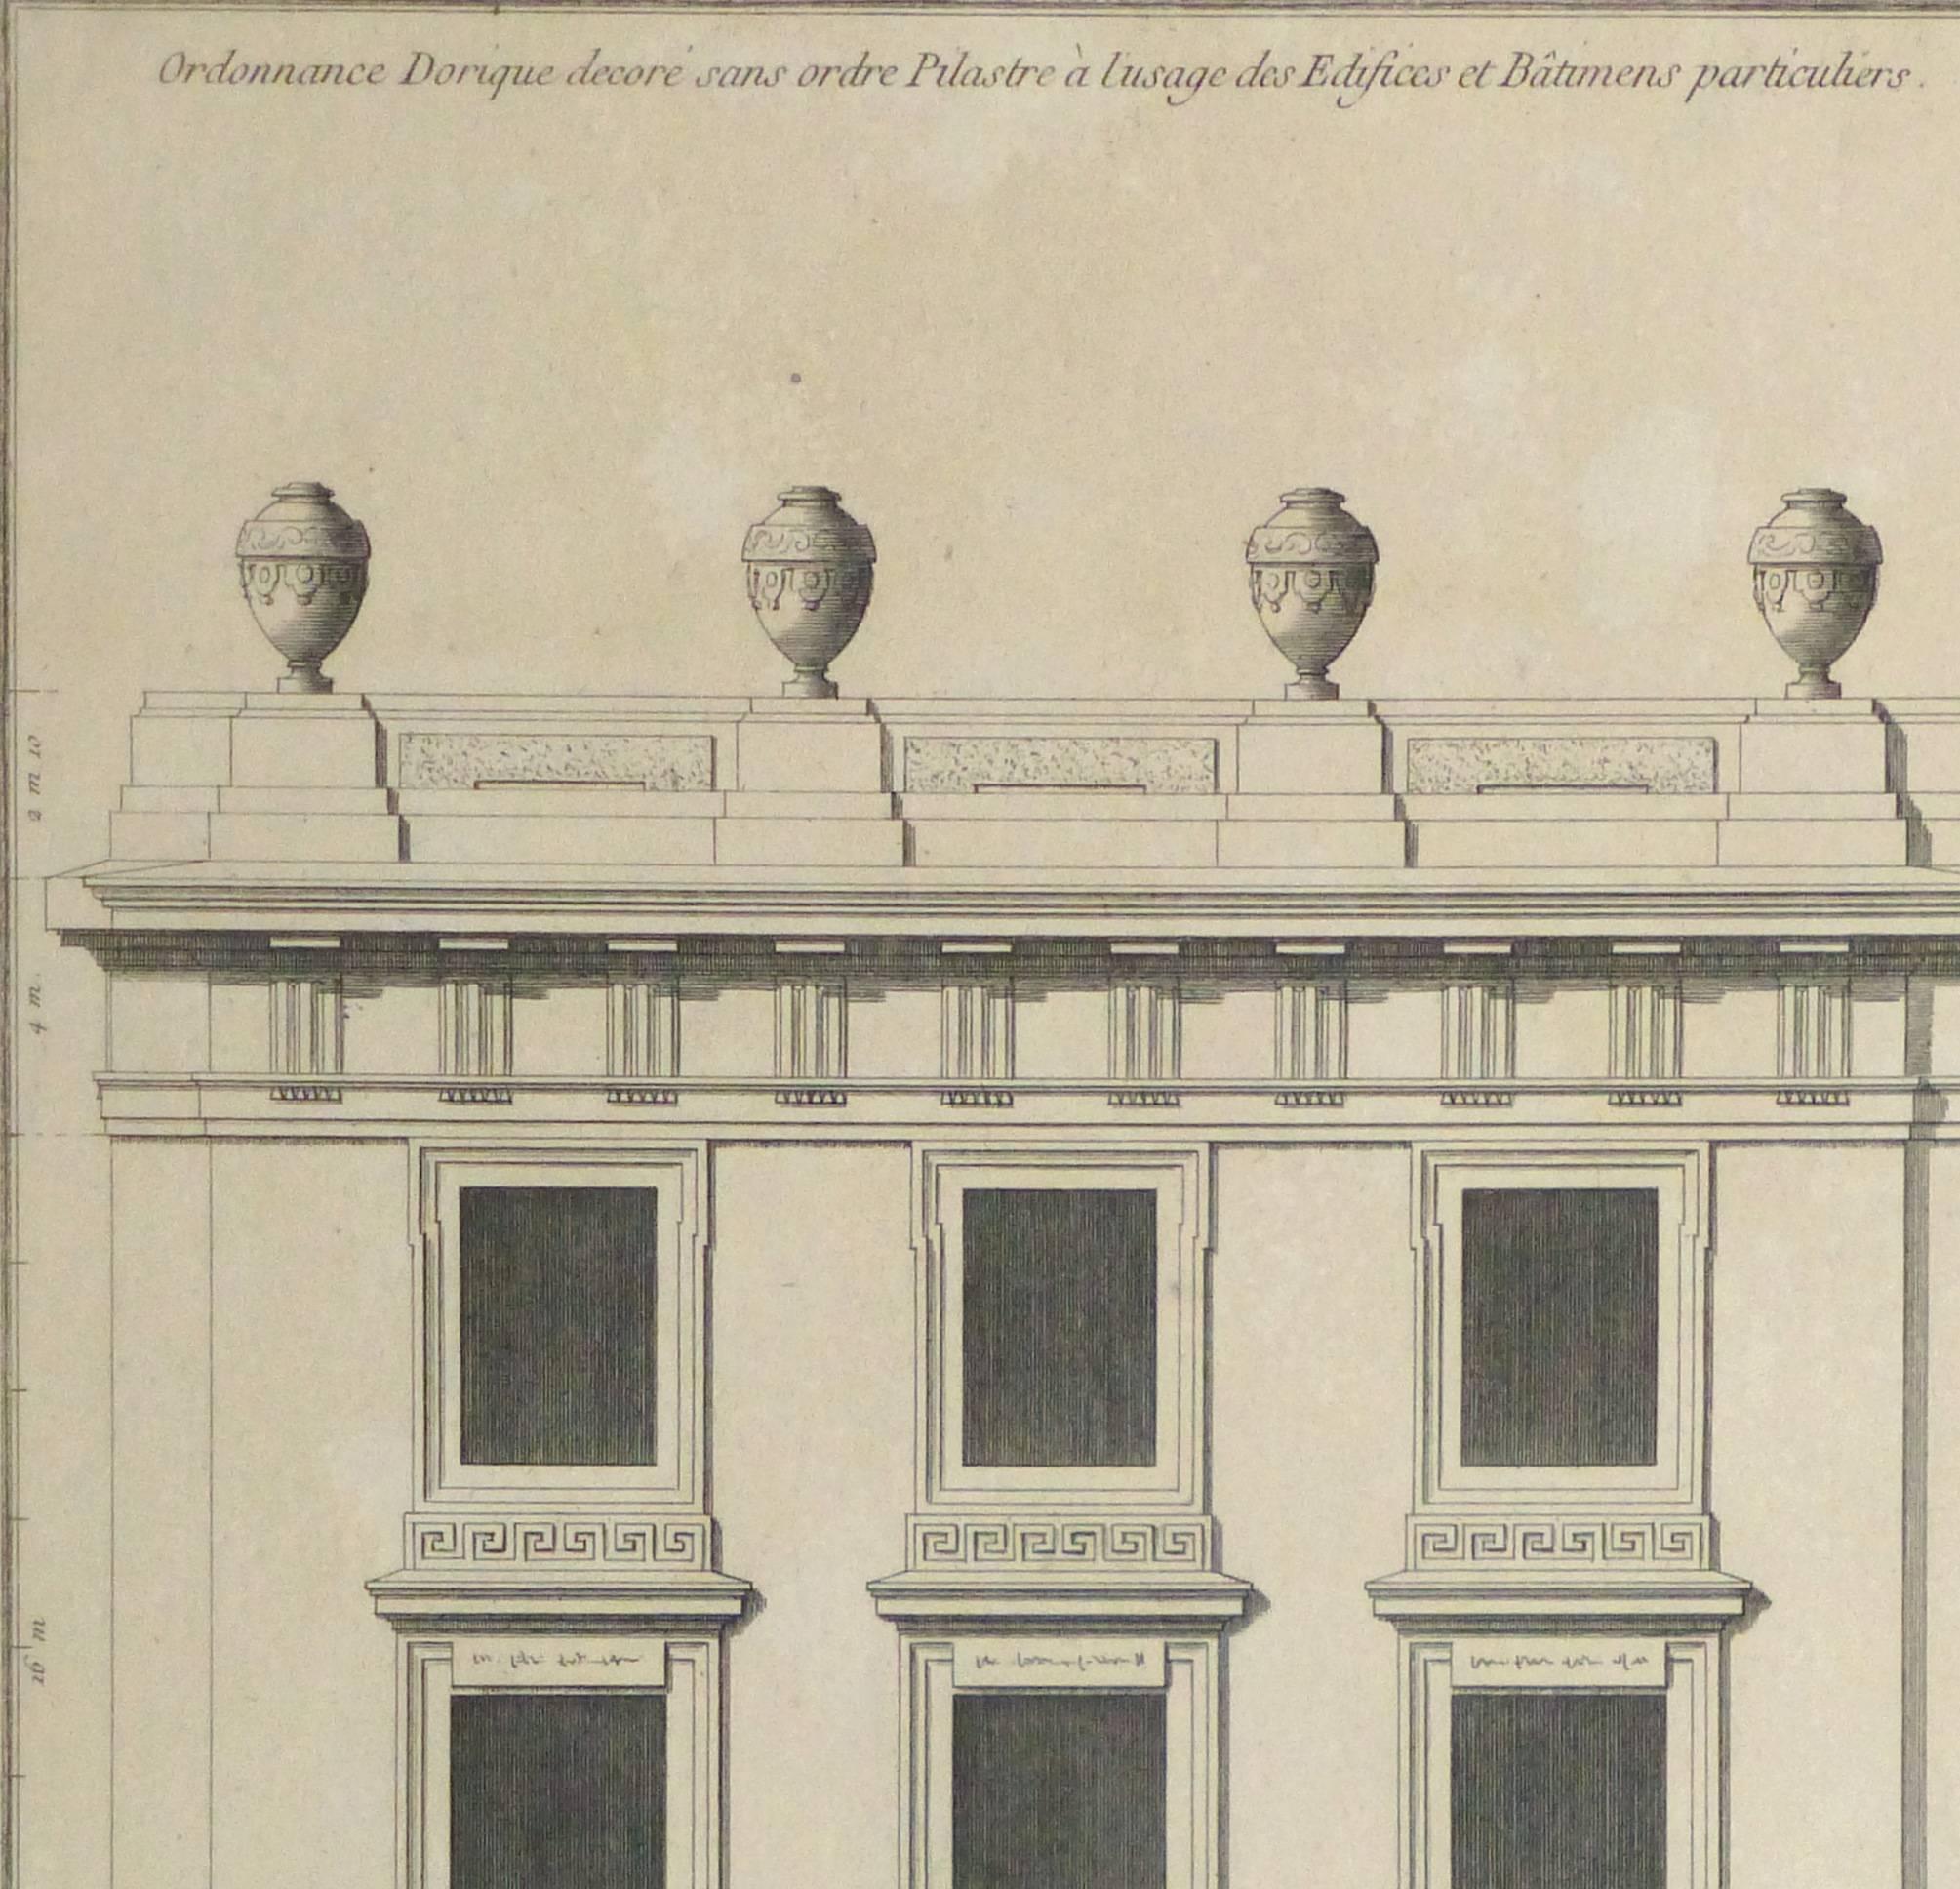 Antique French Copper Engraving - Doric Order Architectural Style - Print by Unknown